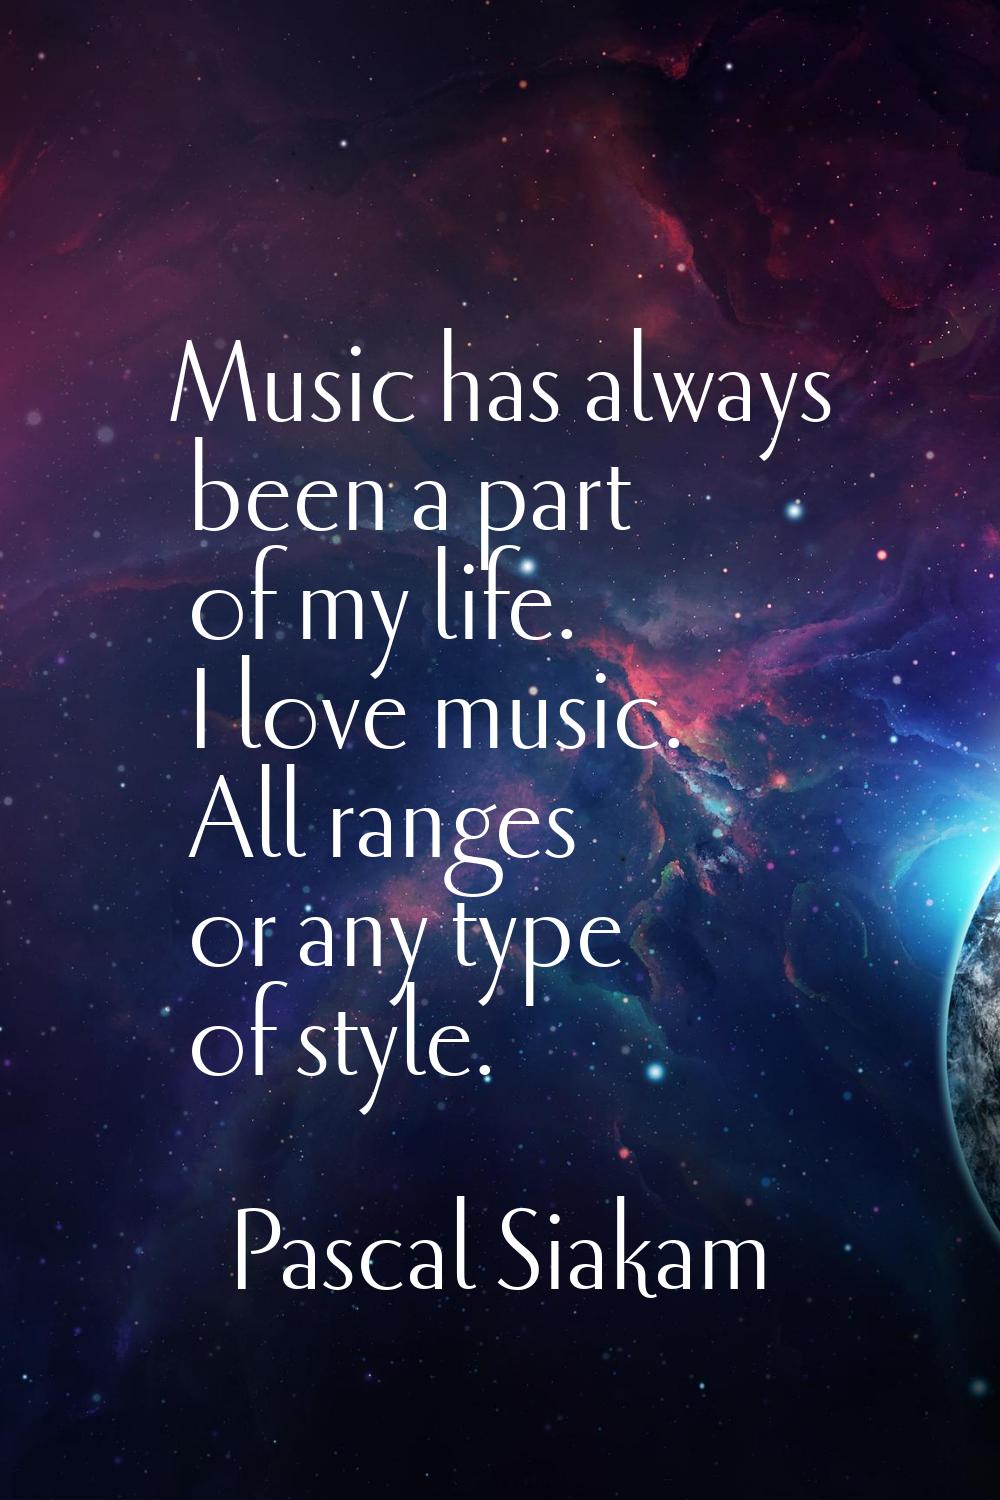 Music has always been a part of my life. I love music. All ranges or any type of style.